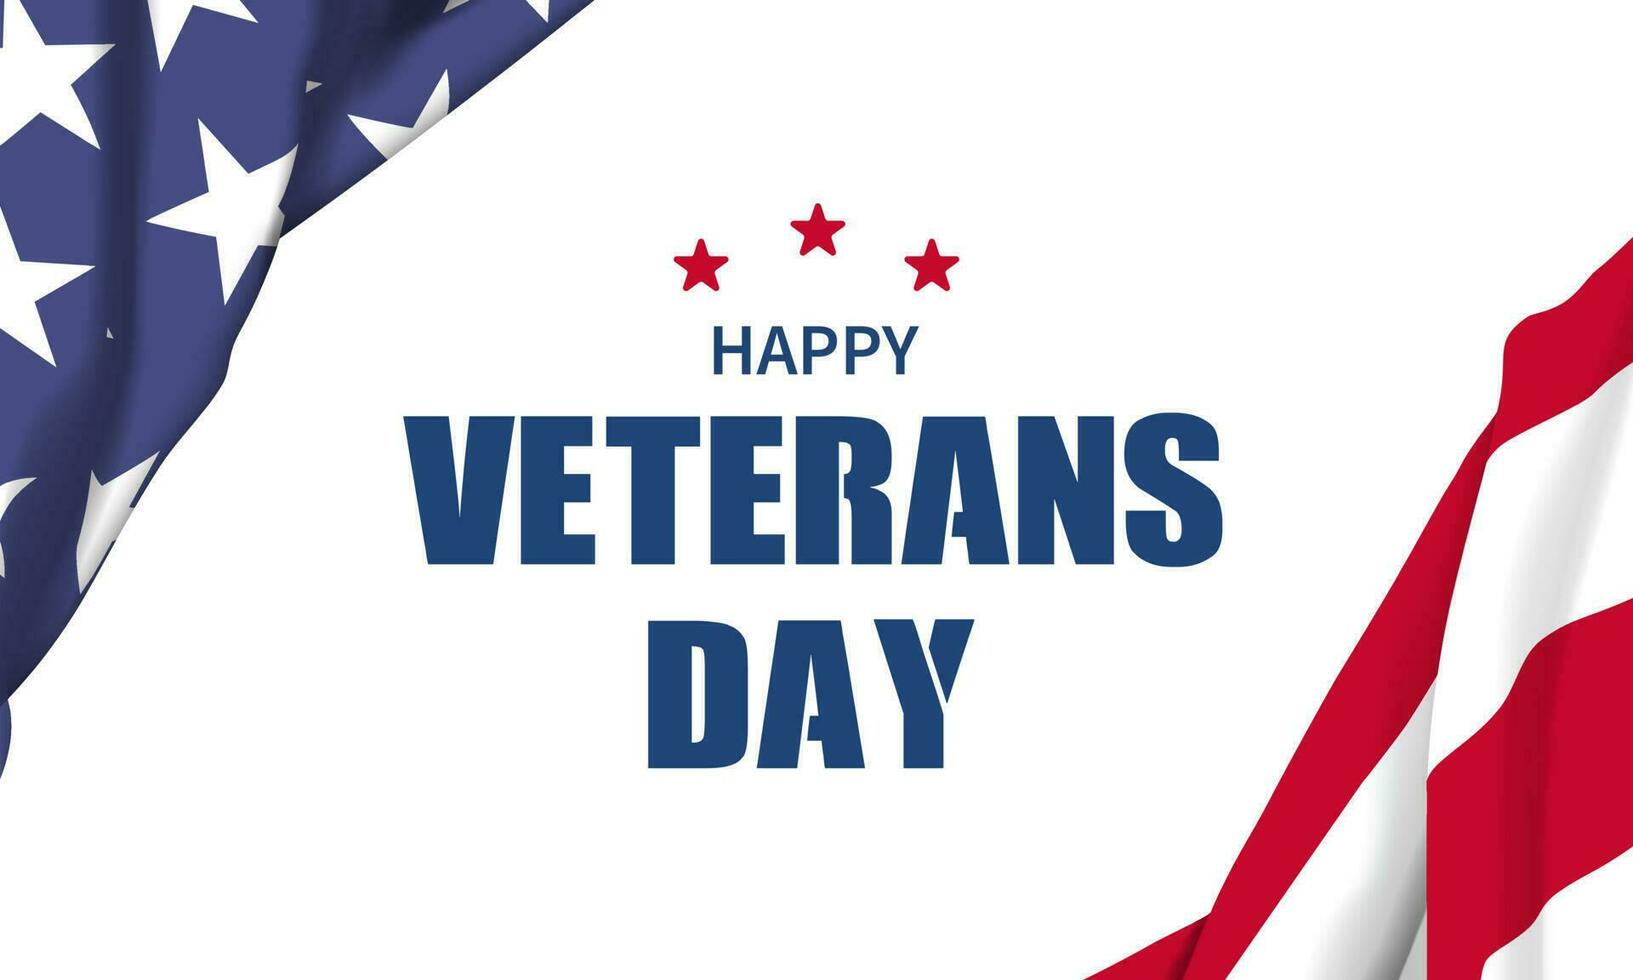 Veteran's day poster.Honoring all who served. Veteran's day illustration with american flag vector